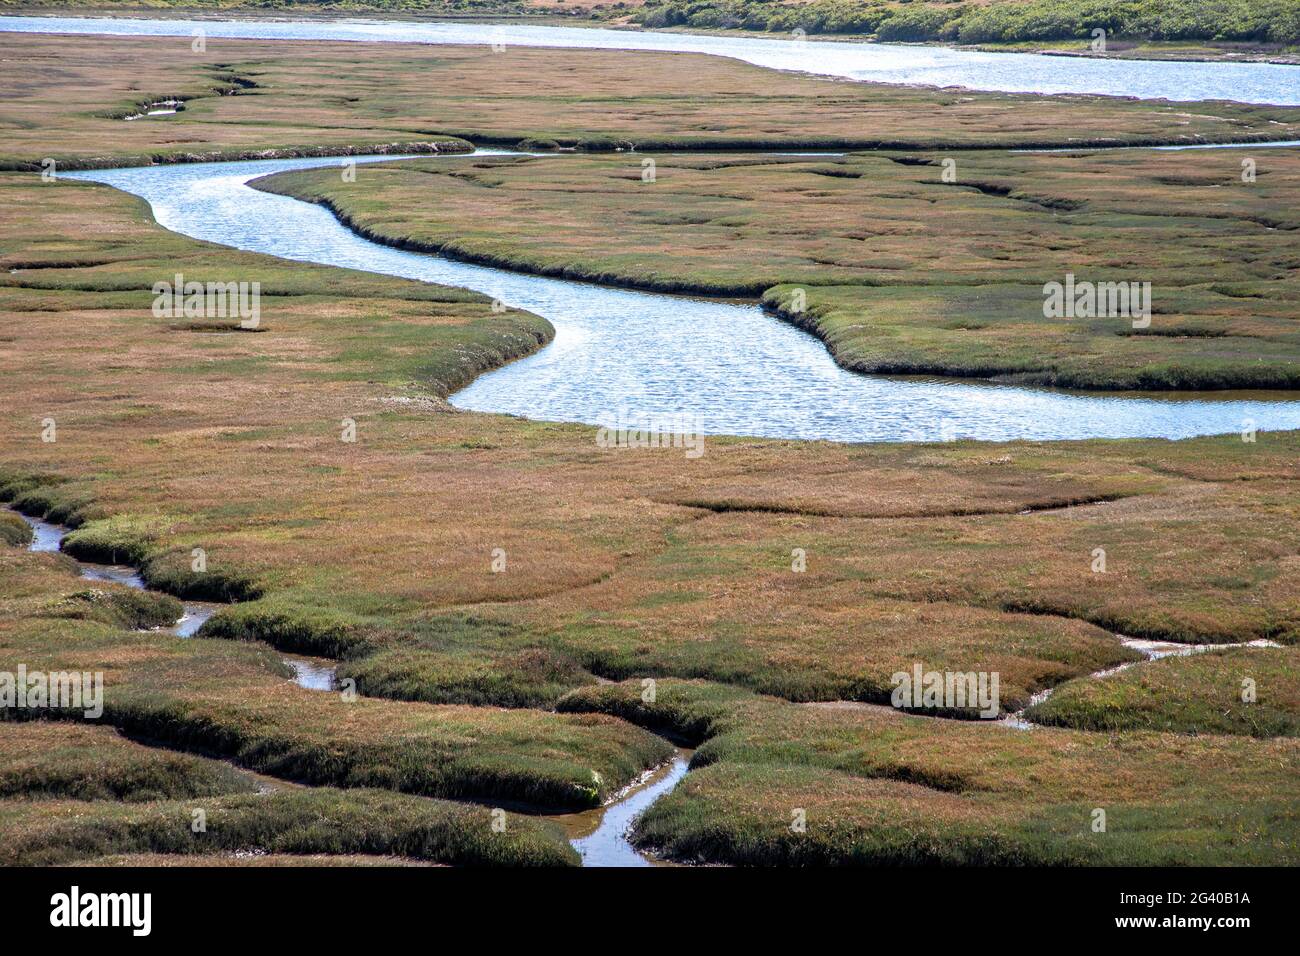 Drakes Estero is an expansive estuary in the Point Reyes National Seashore of Marin County on the Pacific coast of northern California in the United S Stock Photo